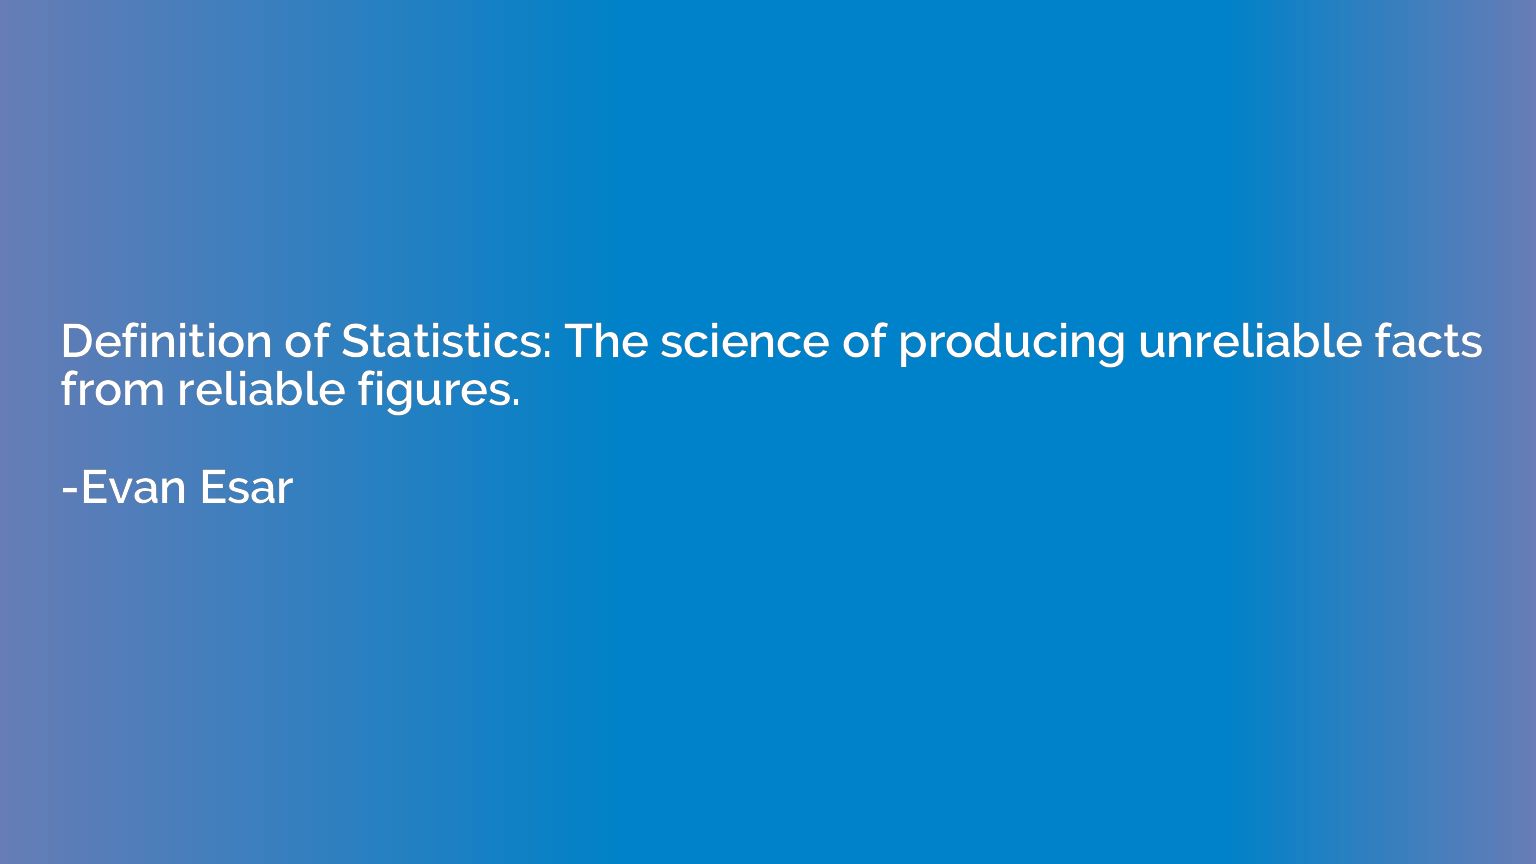 Definition of Statistics: The science of producing unreliabl